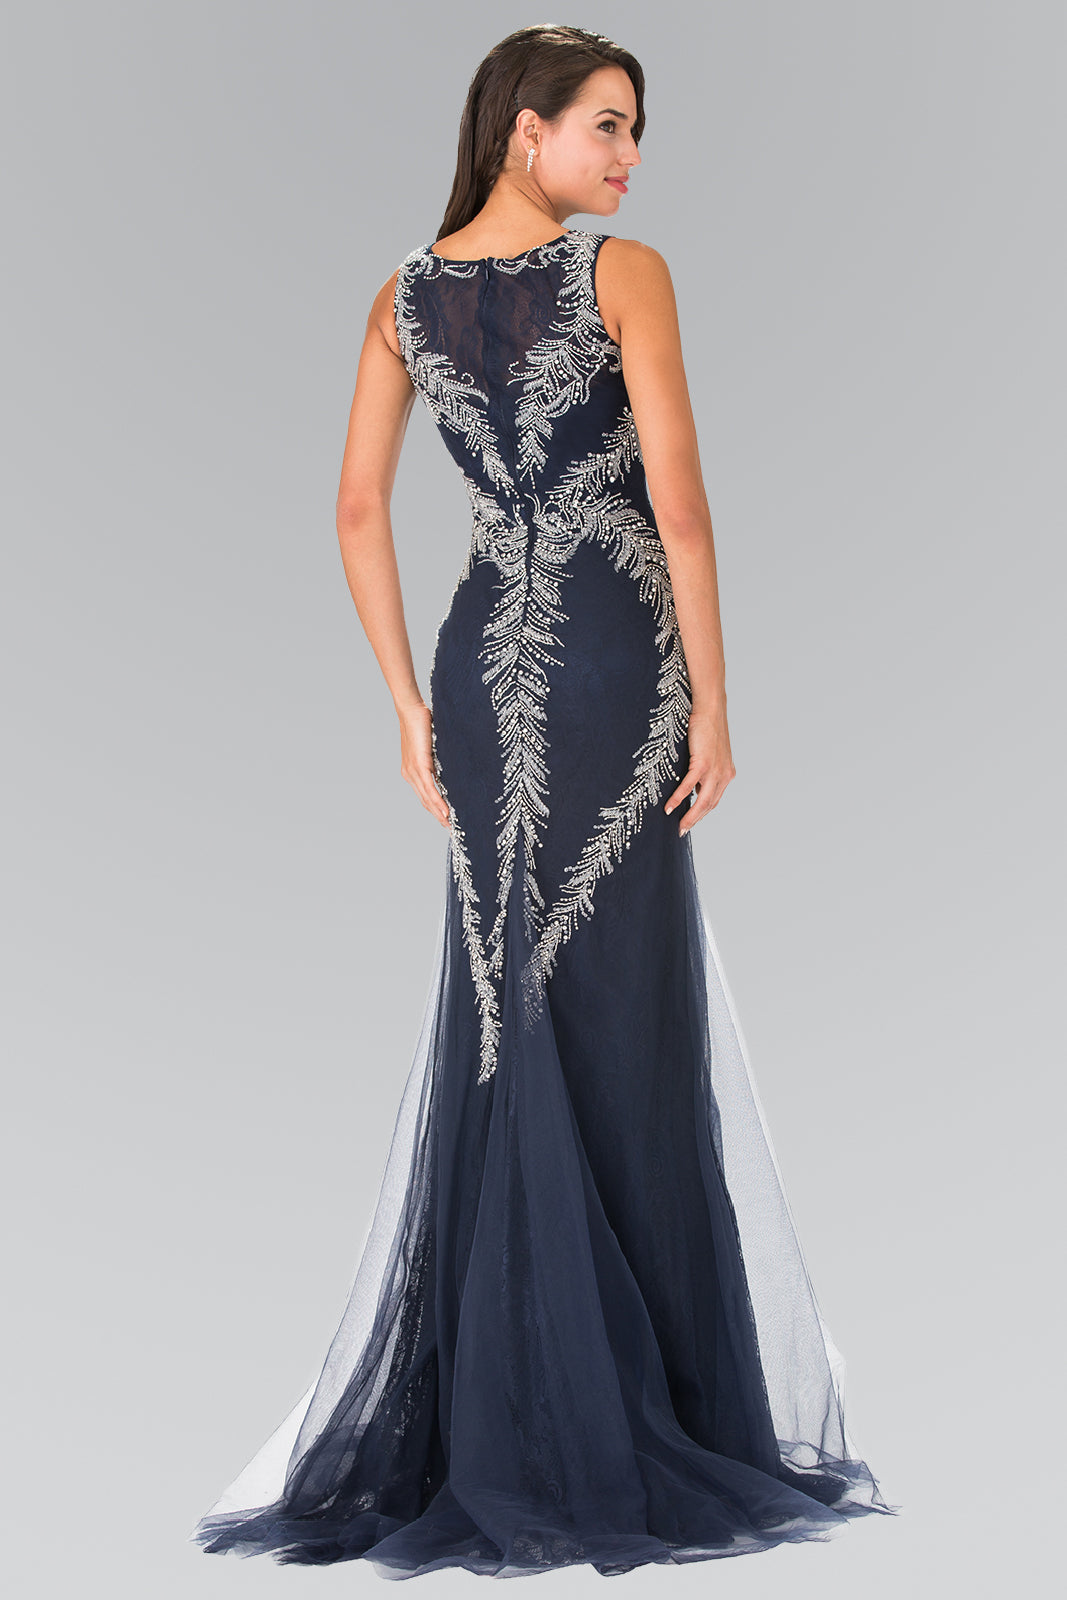 Beaded Lace Boat-Neck Mermaid Dress by Elizabeth K - GL2289 - Special Occasion